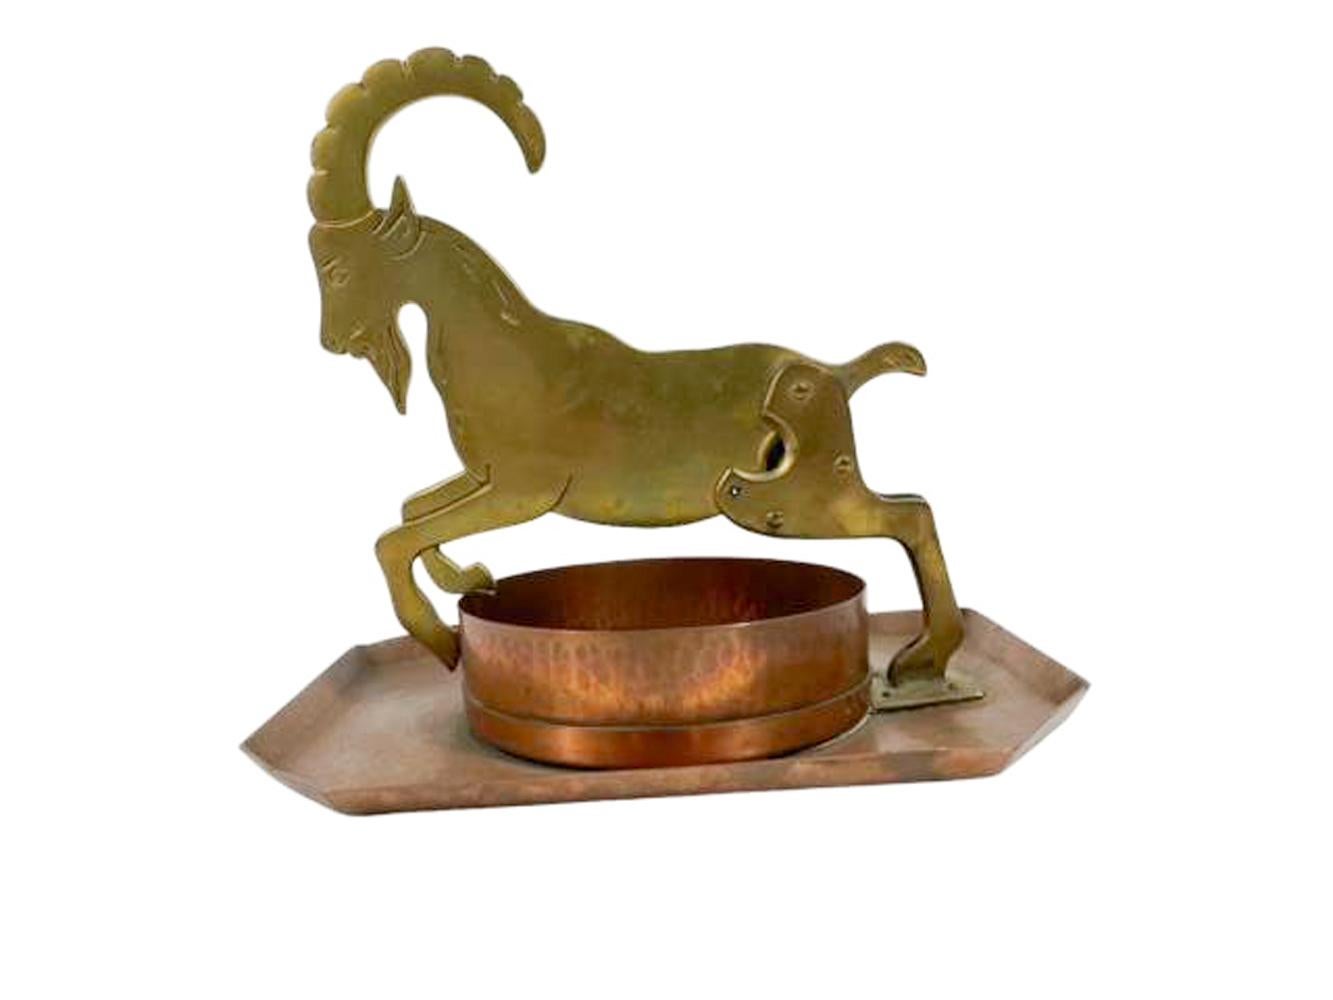 Arts and Crafts figural metalwork cigar cutter / ashtray. A brass Billy goat cigar cutter, jointed at the hip with integral cutter leaping over a cylindrical copper receptacle mounted on an elongated octagonal tray. The tray marked on the underside